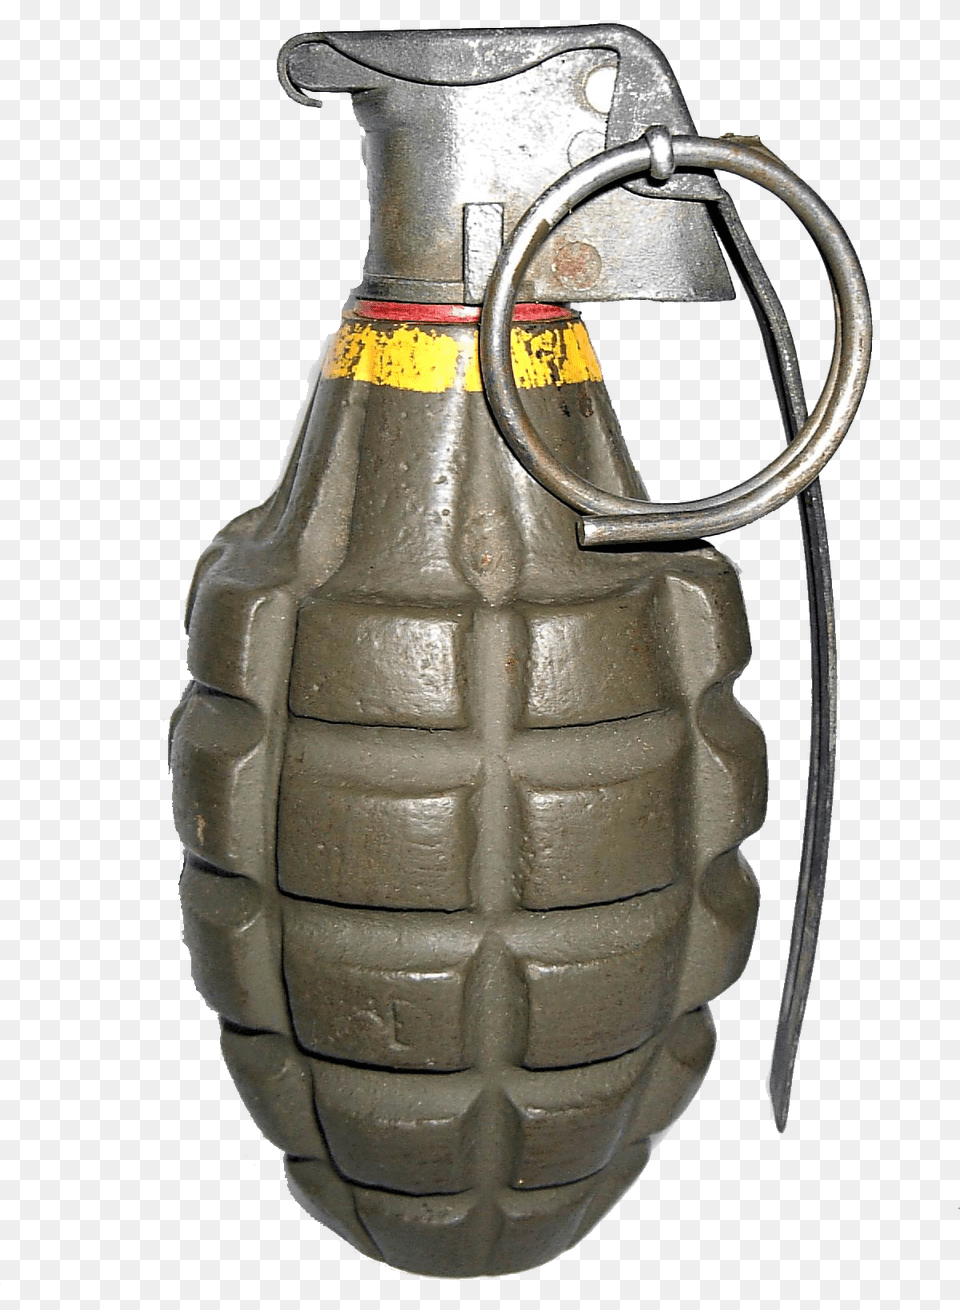 Hand Grenade Grenade, Ammunition, Weapon, Bomb Png Image